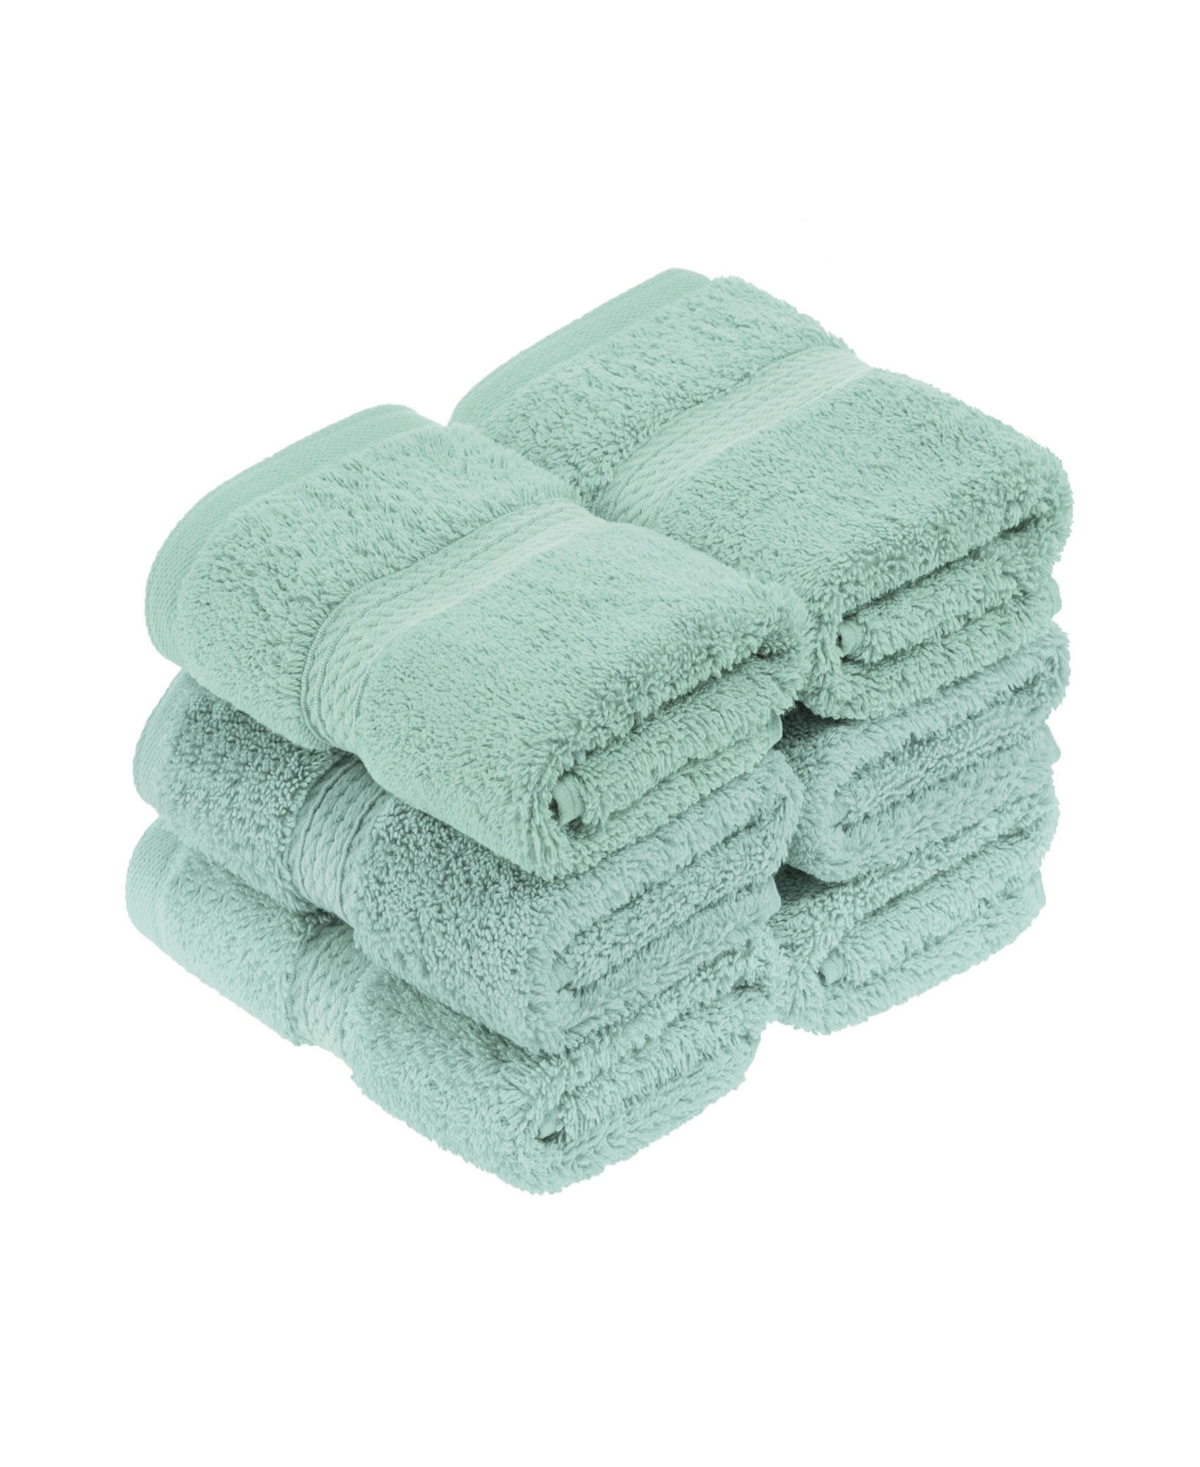 Superior Highly Absorbent 6 Piece Egyptian Cotton Ultra Plush Solid Face Towel Set Bedding In Sea Foam